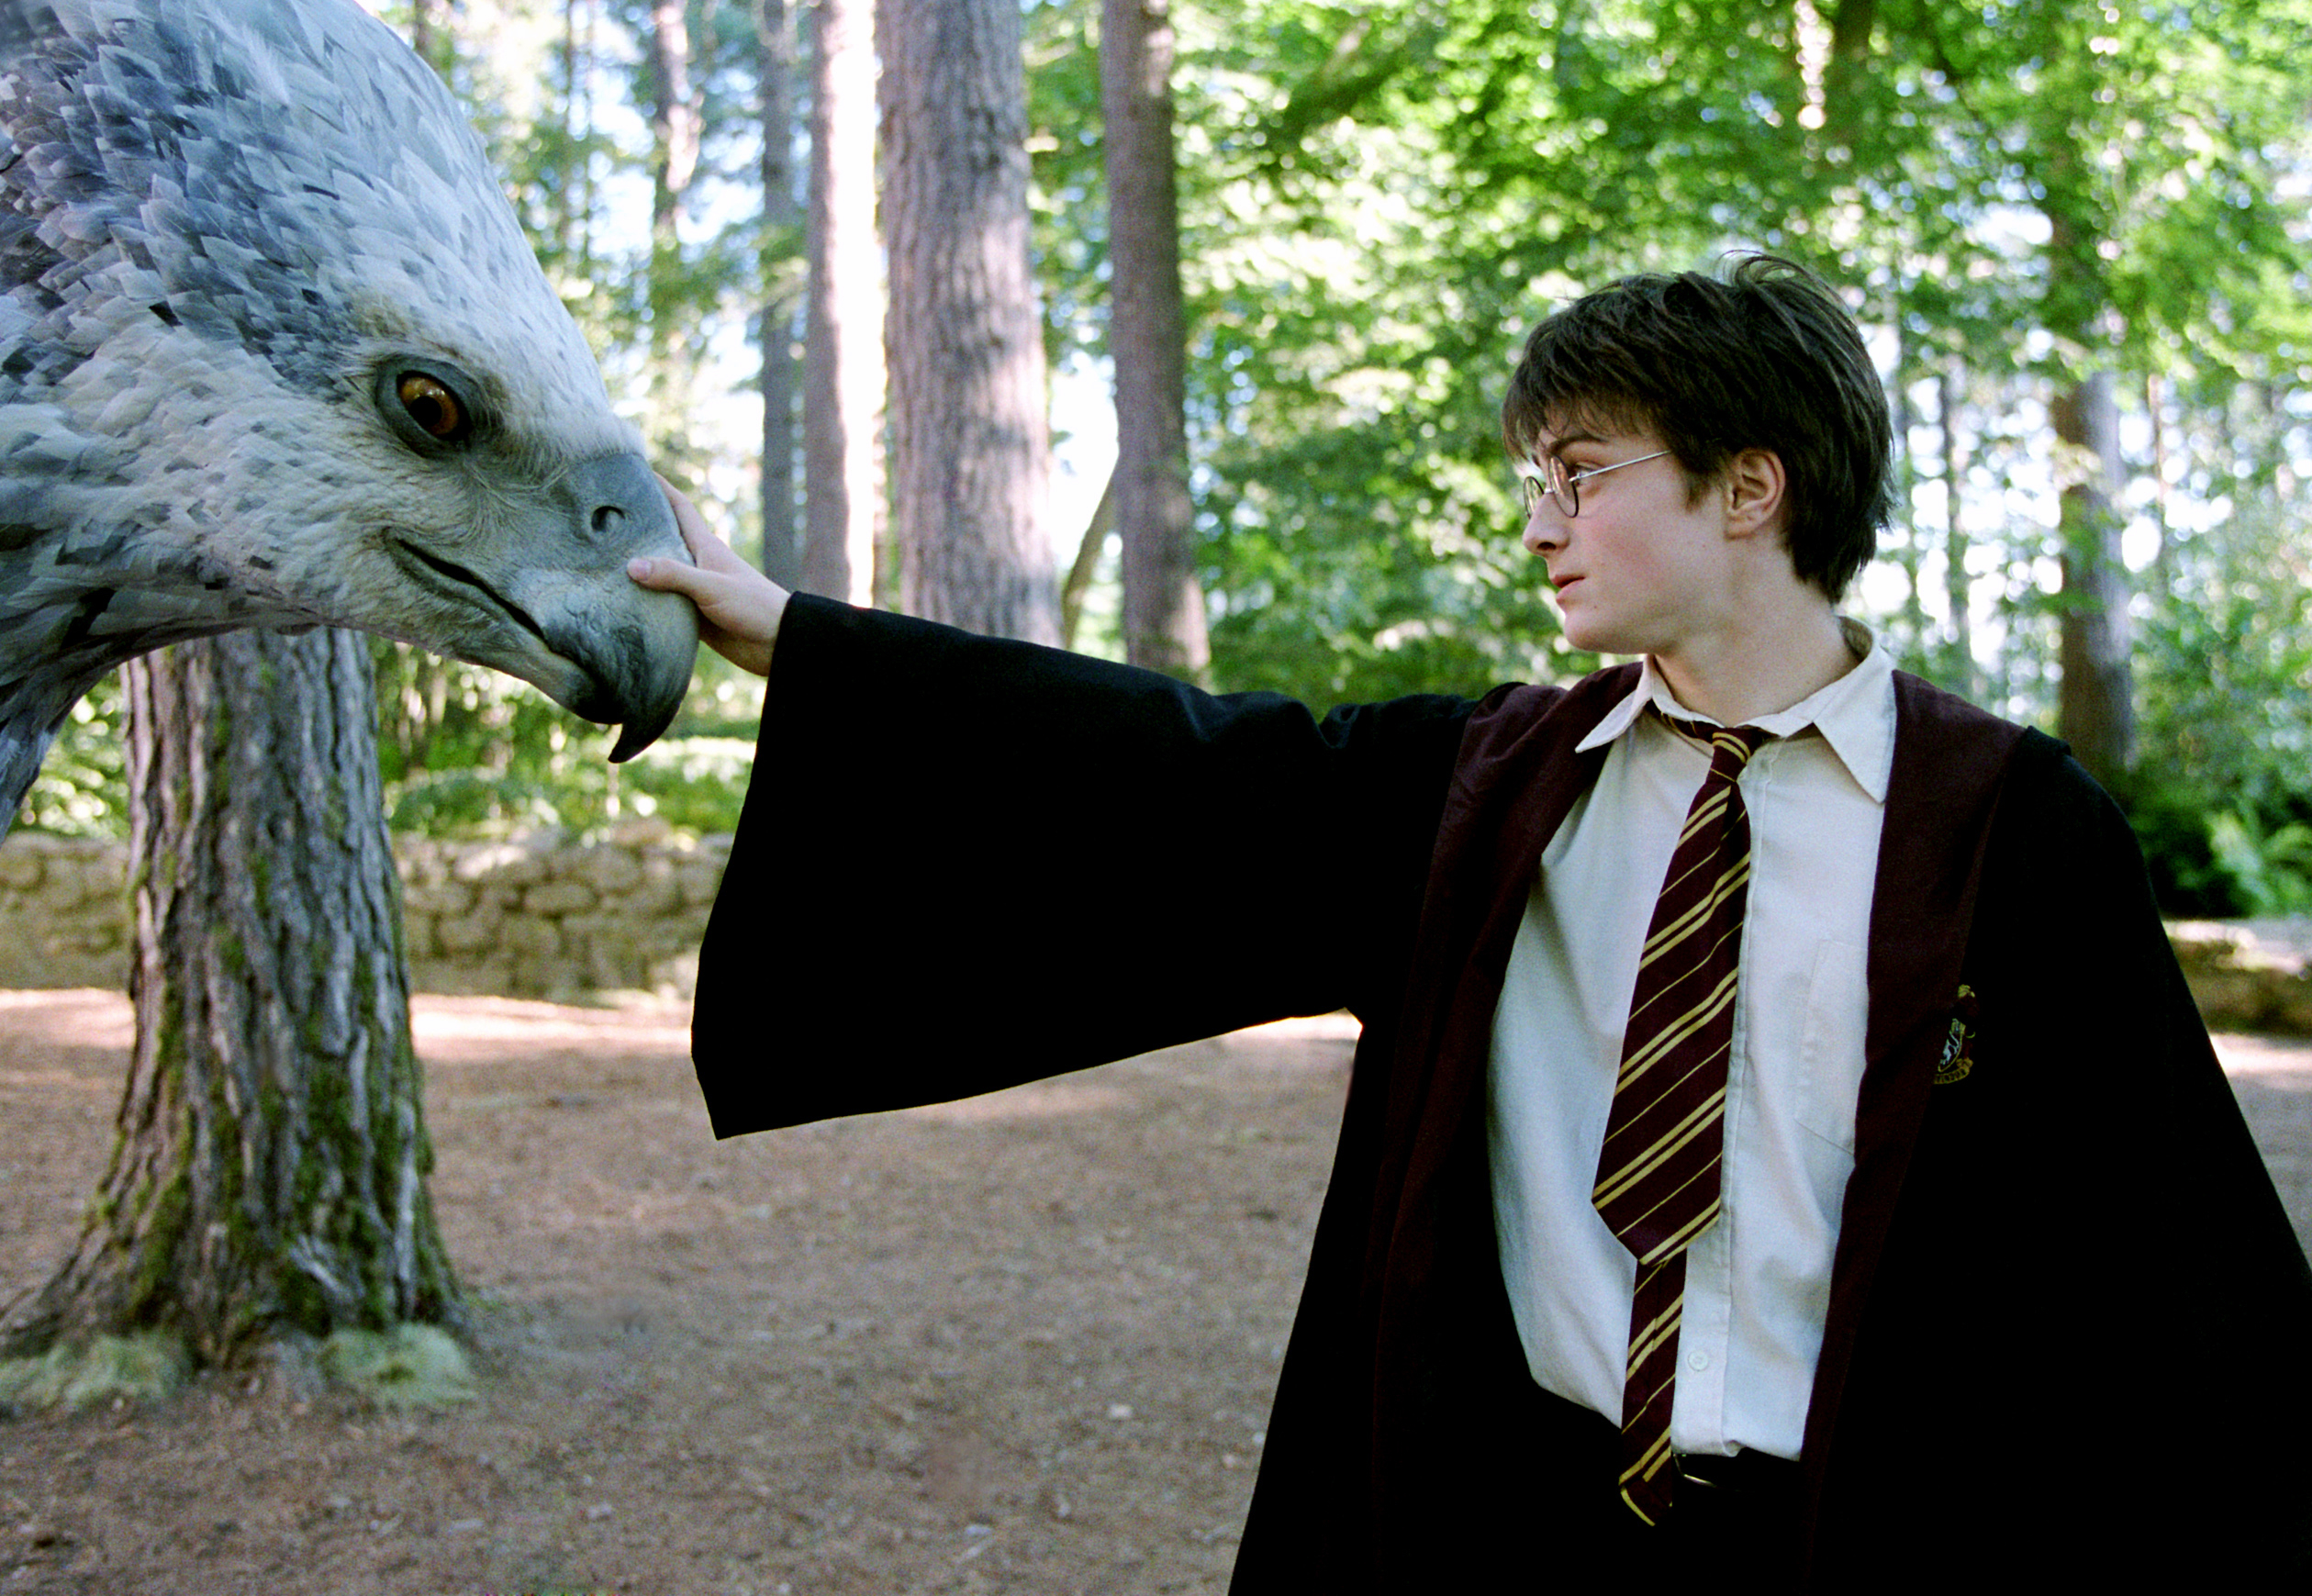 Harry Potter in school uniform affectionately interacts with a large, lifelike hippogriff in a forest setting